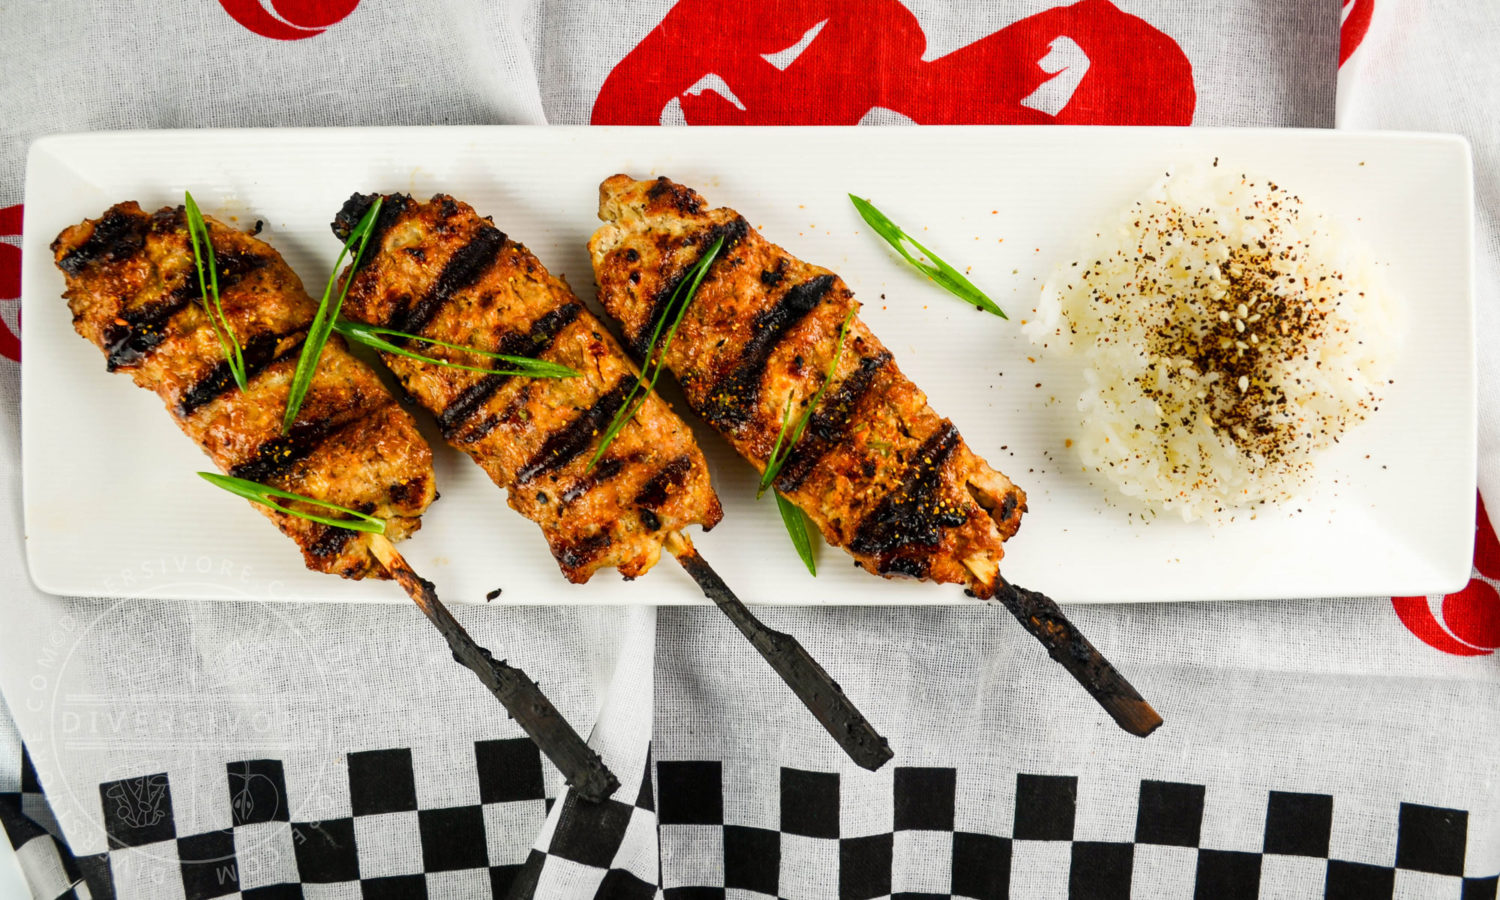 Allergy-friendly Chicken Tsukune (Japanese chicken meatball skewers) made without wheat, dairy, or eggs - Diversivore.com